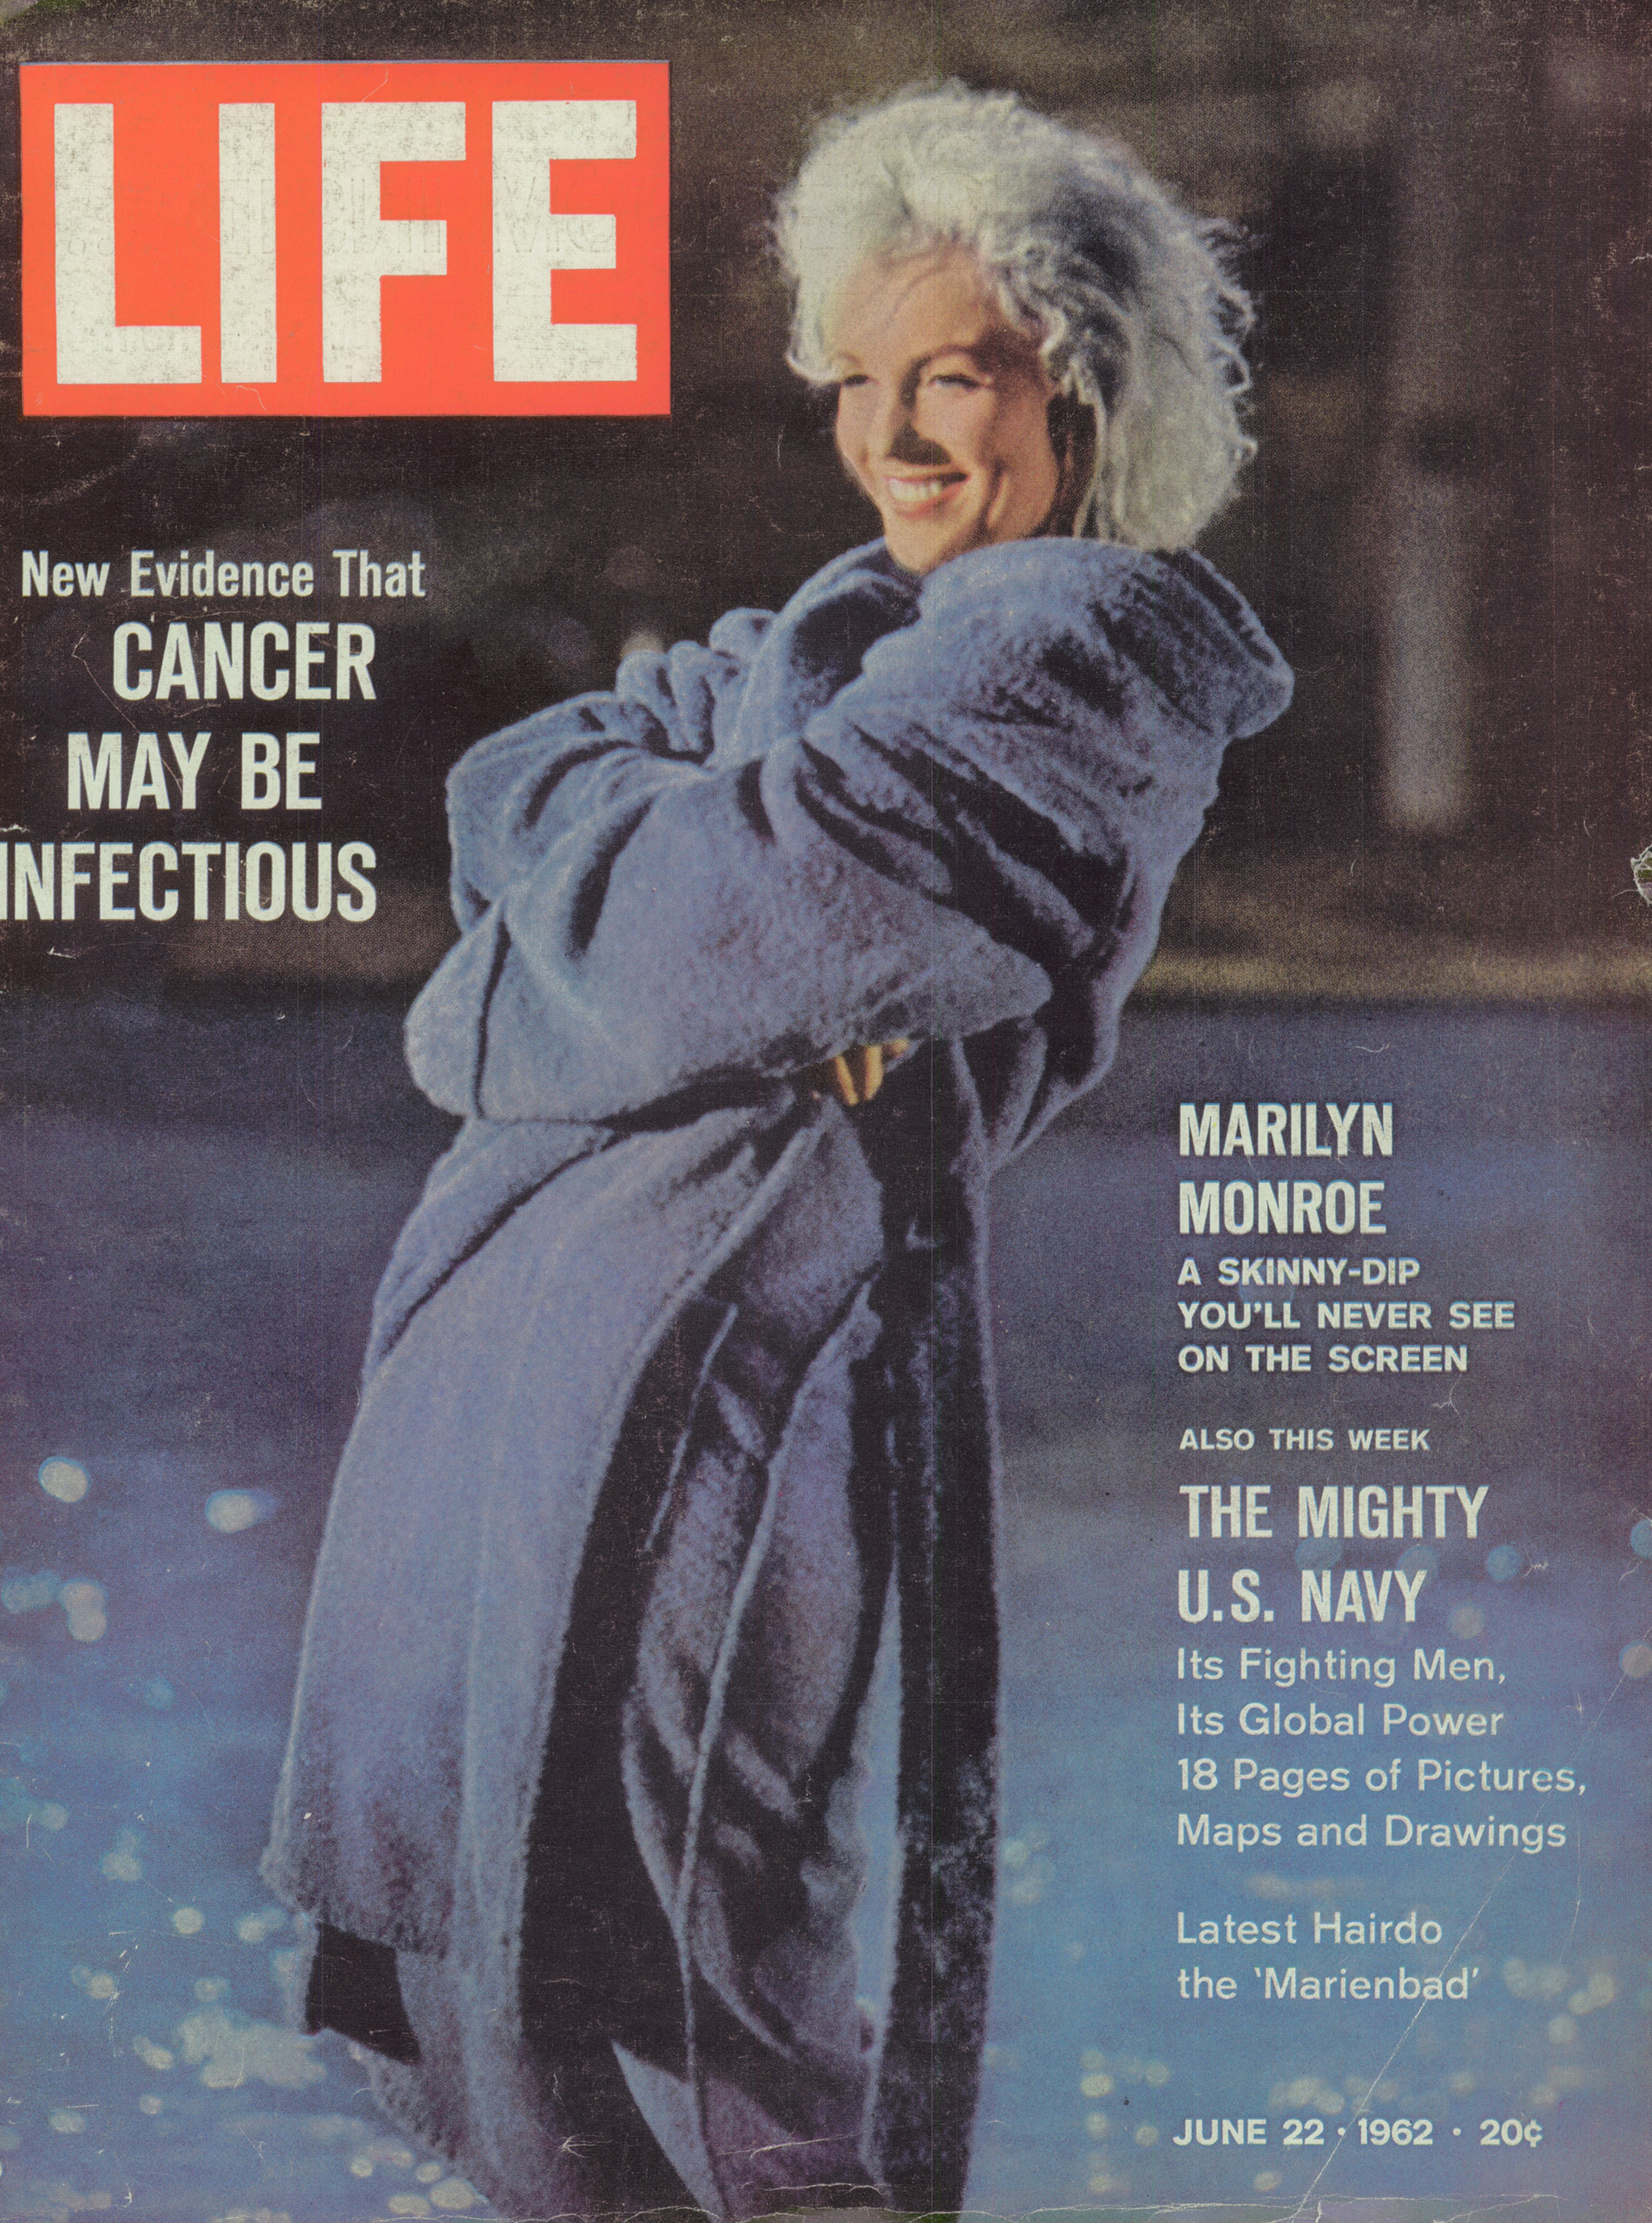 June 22, 1962 cover of LIFE magazine.